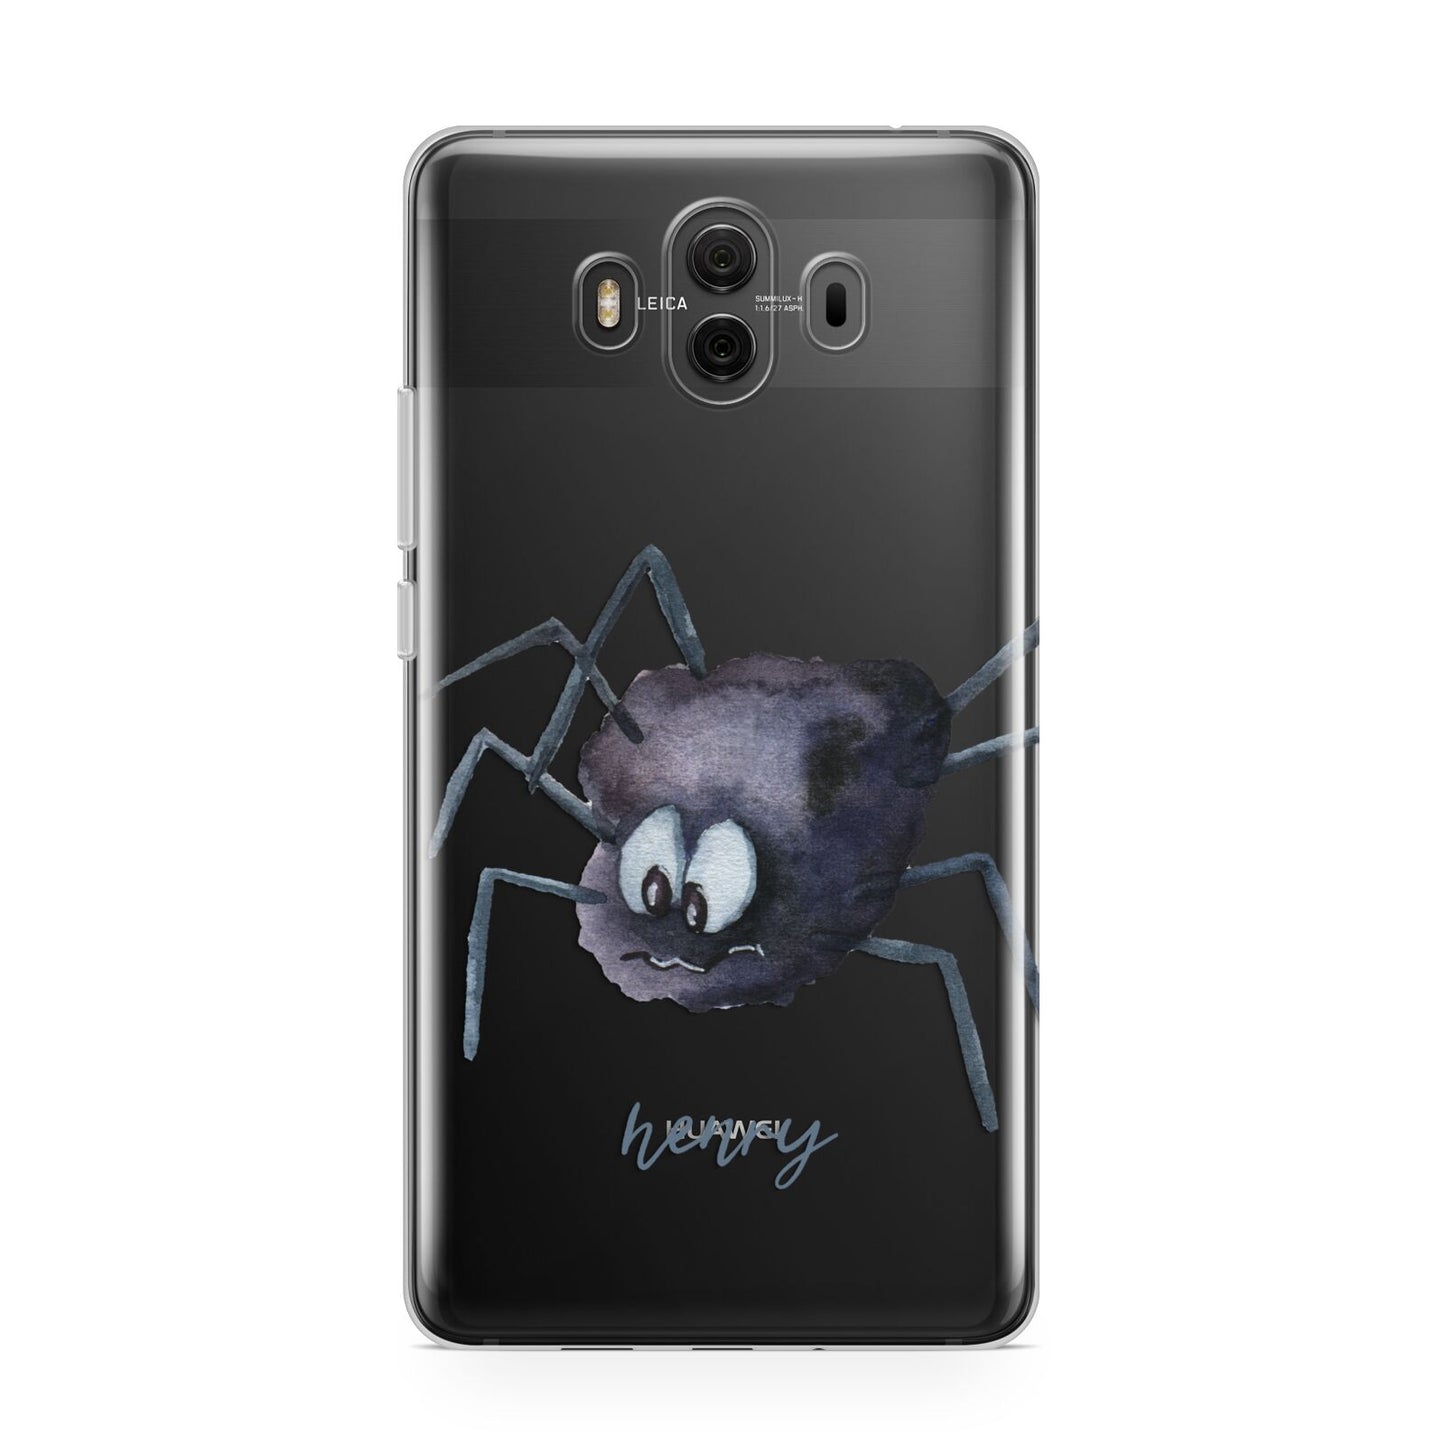 Scared Spider Personalised Huawei Mate 10 Protective Phone Case